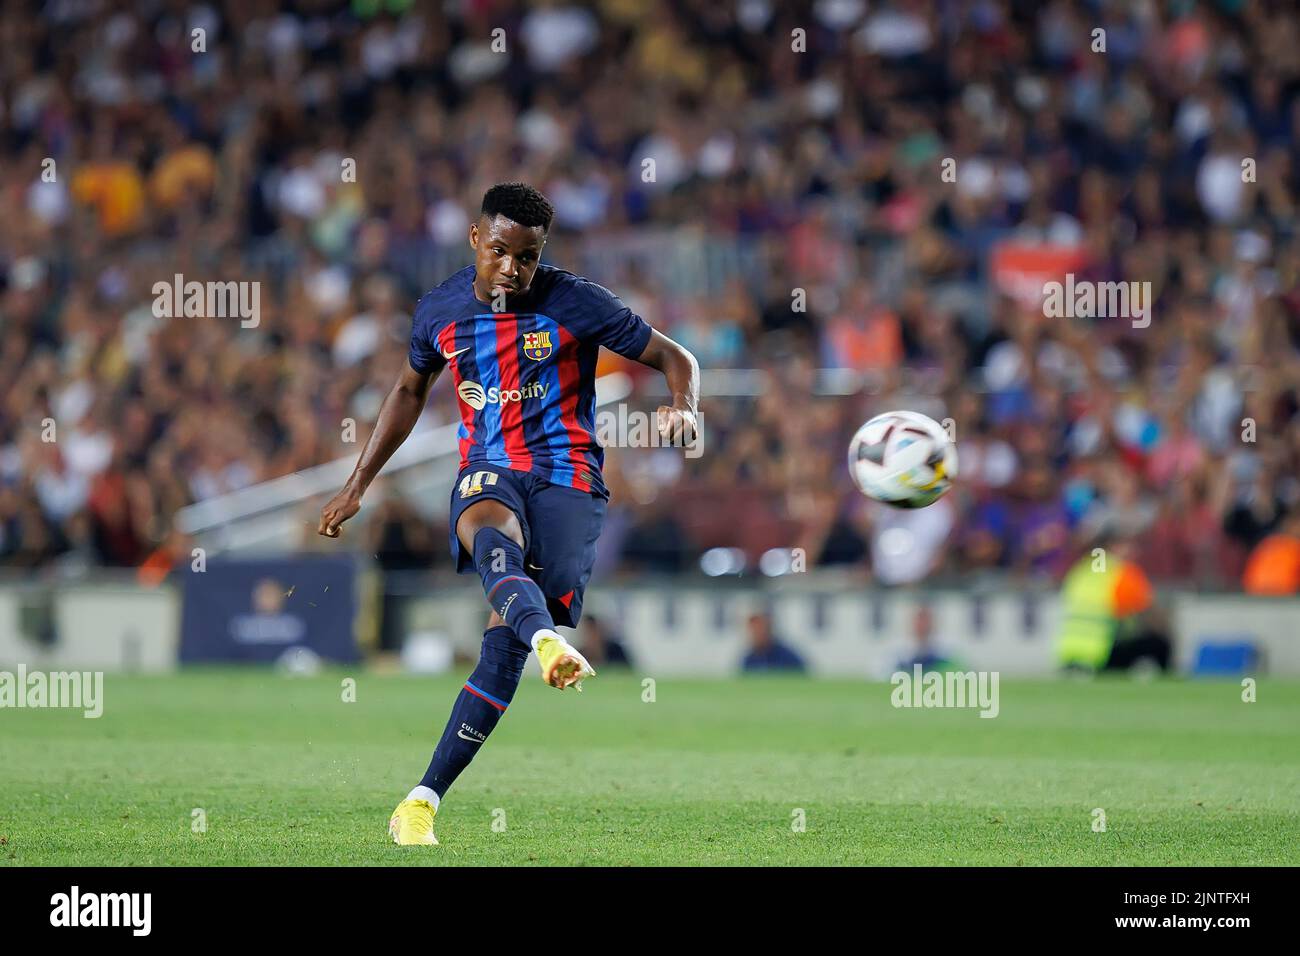 Barcelona, Spain. 13th Aug, 2022. Ansu Fati in action during the La Liga match between FC Barcelona and Rayo Vallecano at the Spotify Camp Nou Stadium in Barcelona, Spain. Credit: Christian Bertrand/Alamy Live News Stock Photo